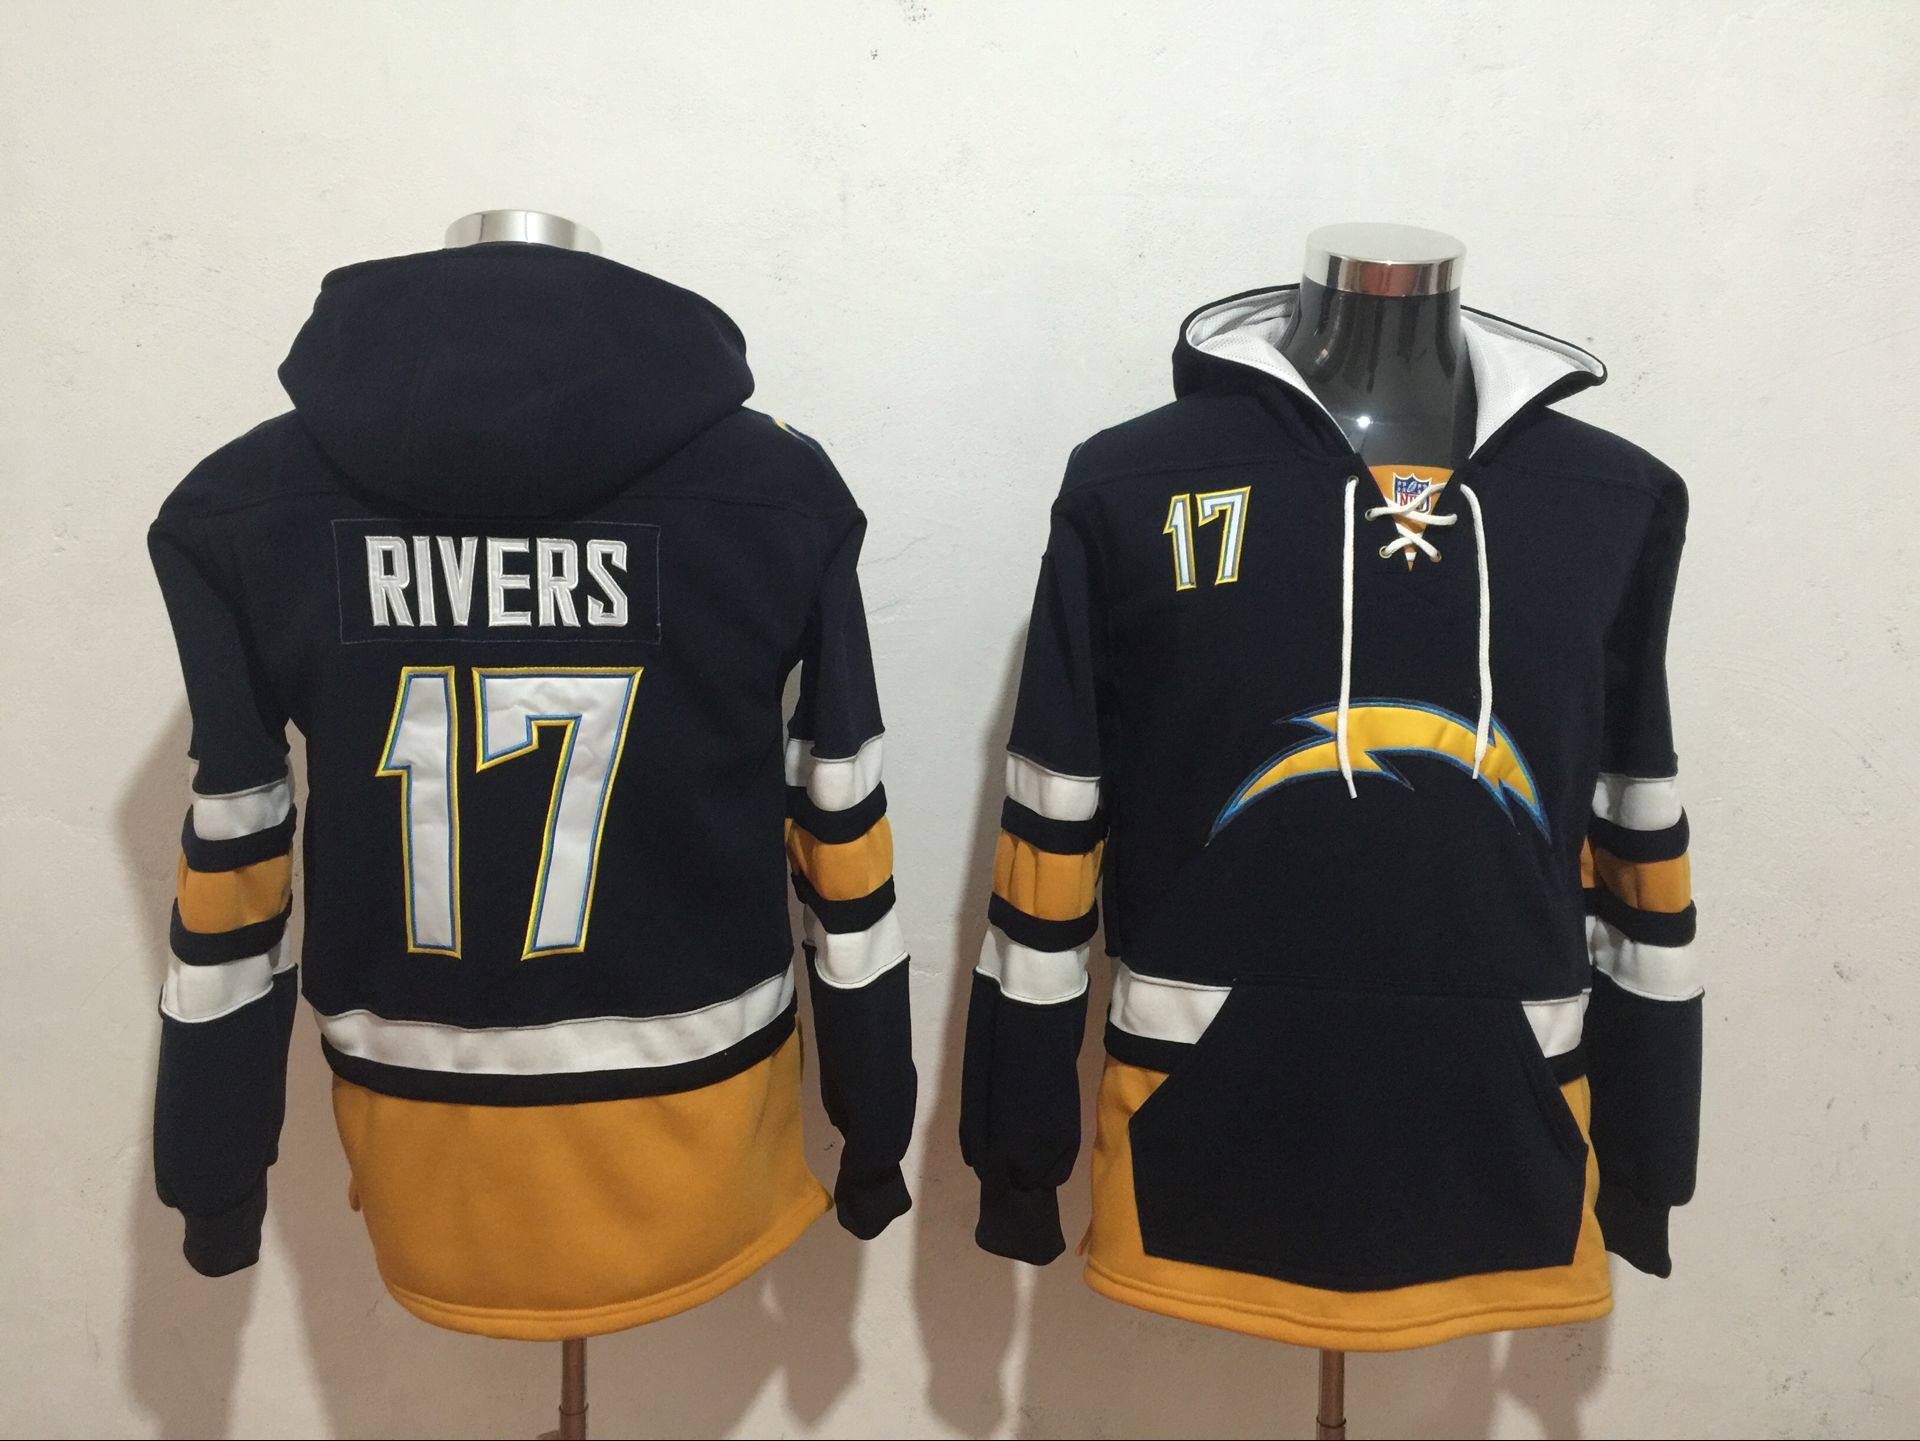 Los Angeles Chargers 17 Philip Rivers Black All Stitched Hooded Sweatshirt